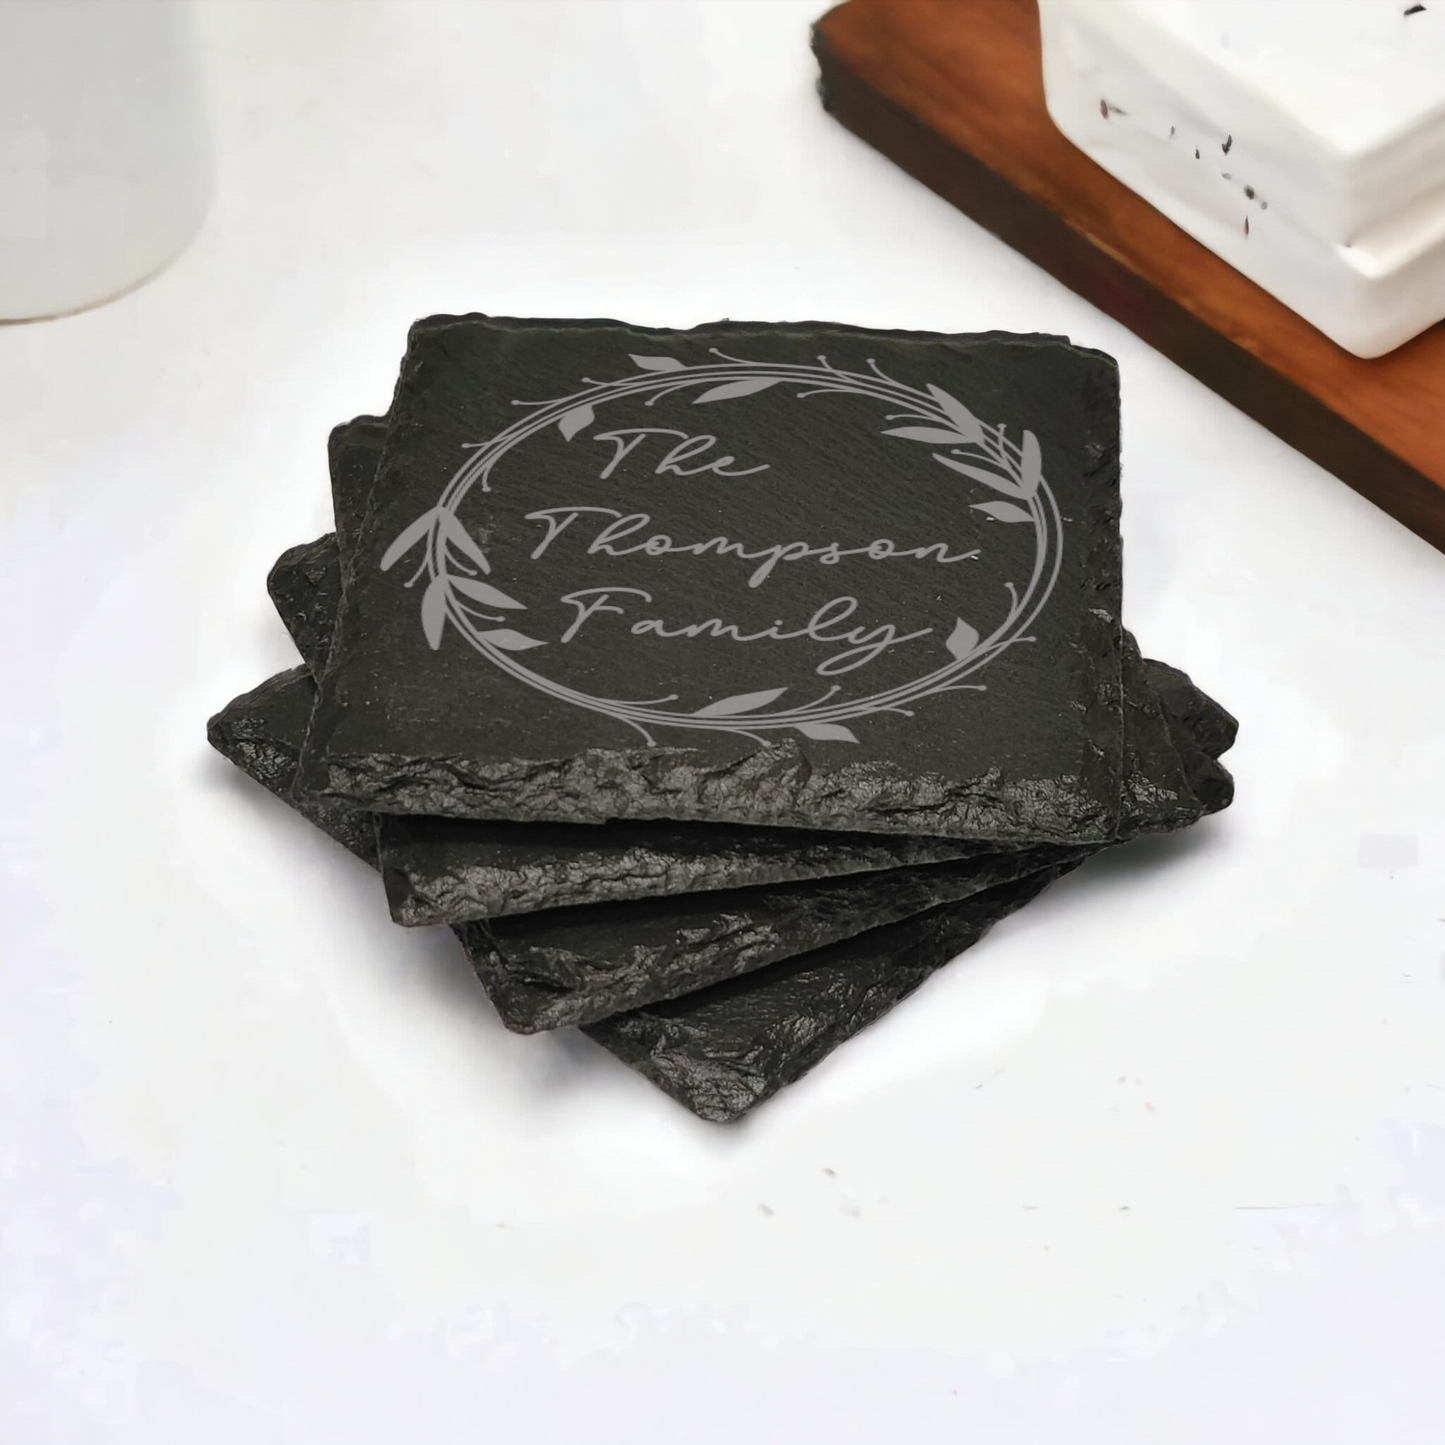 Family name monogram (Style 1) on set of 4 slate coasters with font of your choice